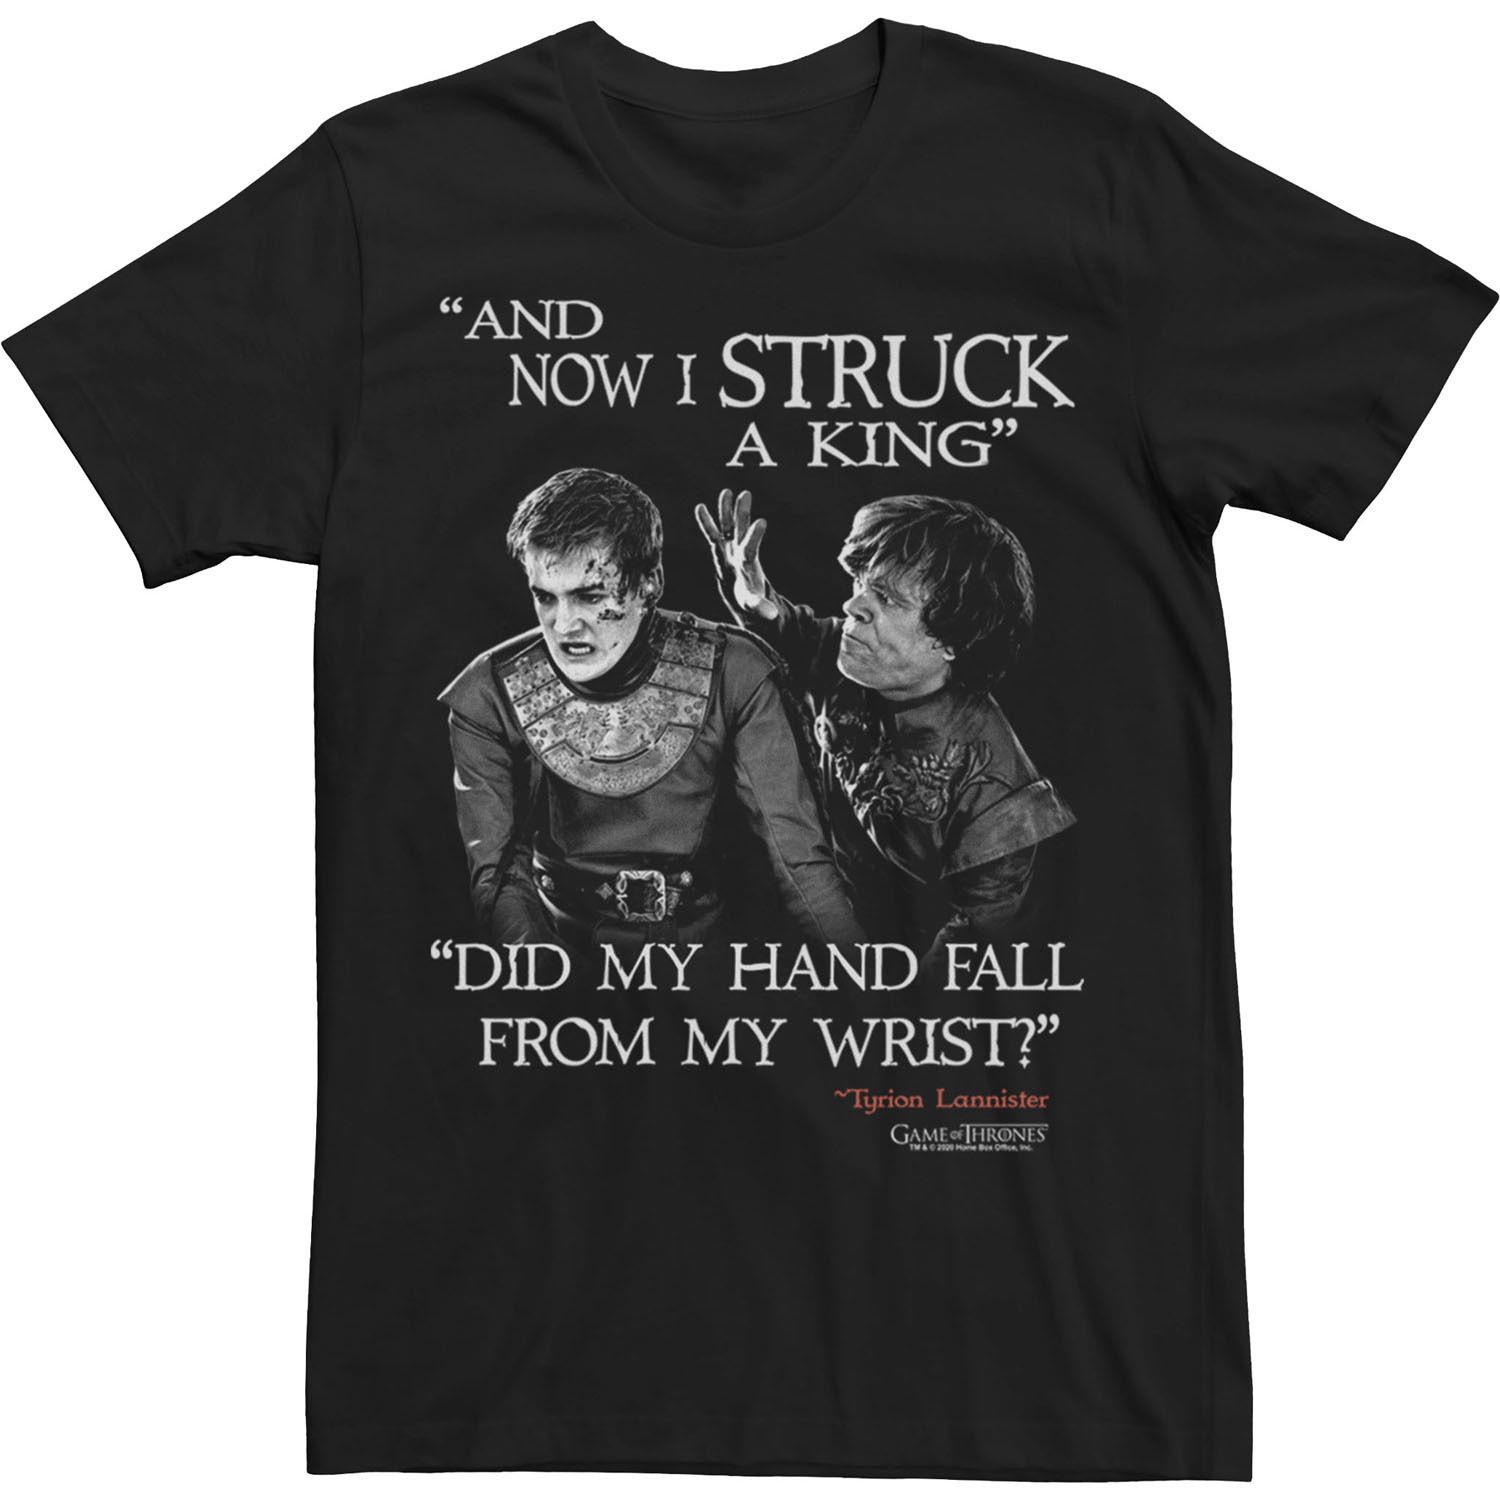 Image for Licensed Character Men's Game Of Thrones Tyrion & Joffrey And Now I Struck A King Tee at Kohl's.